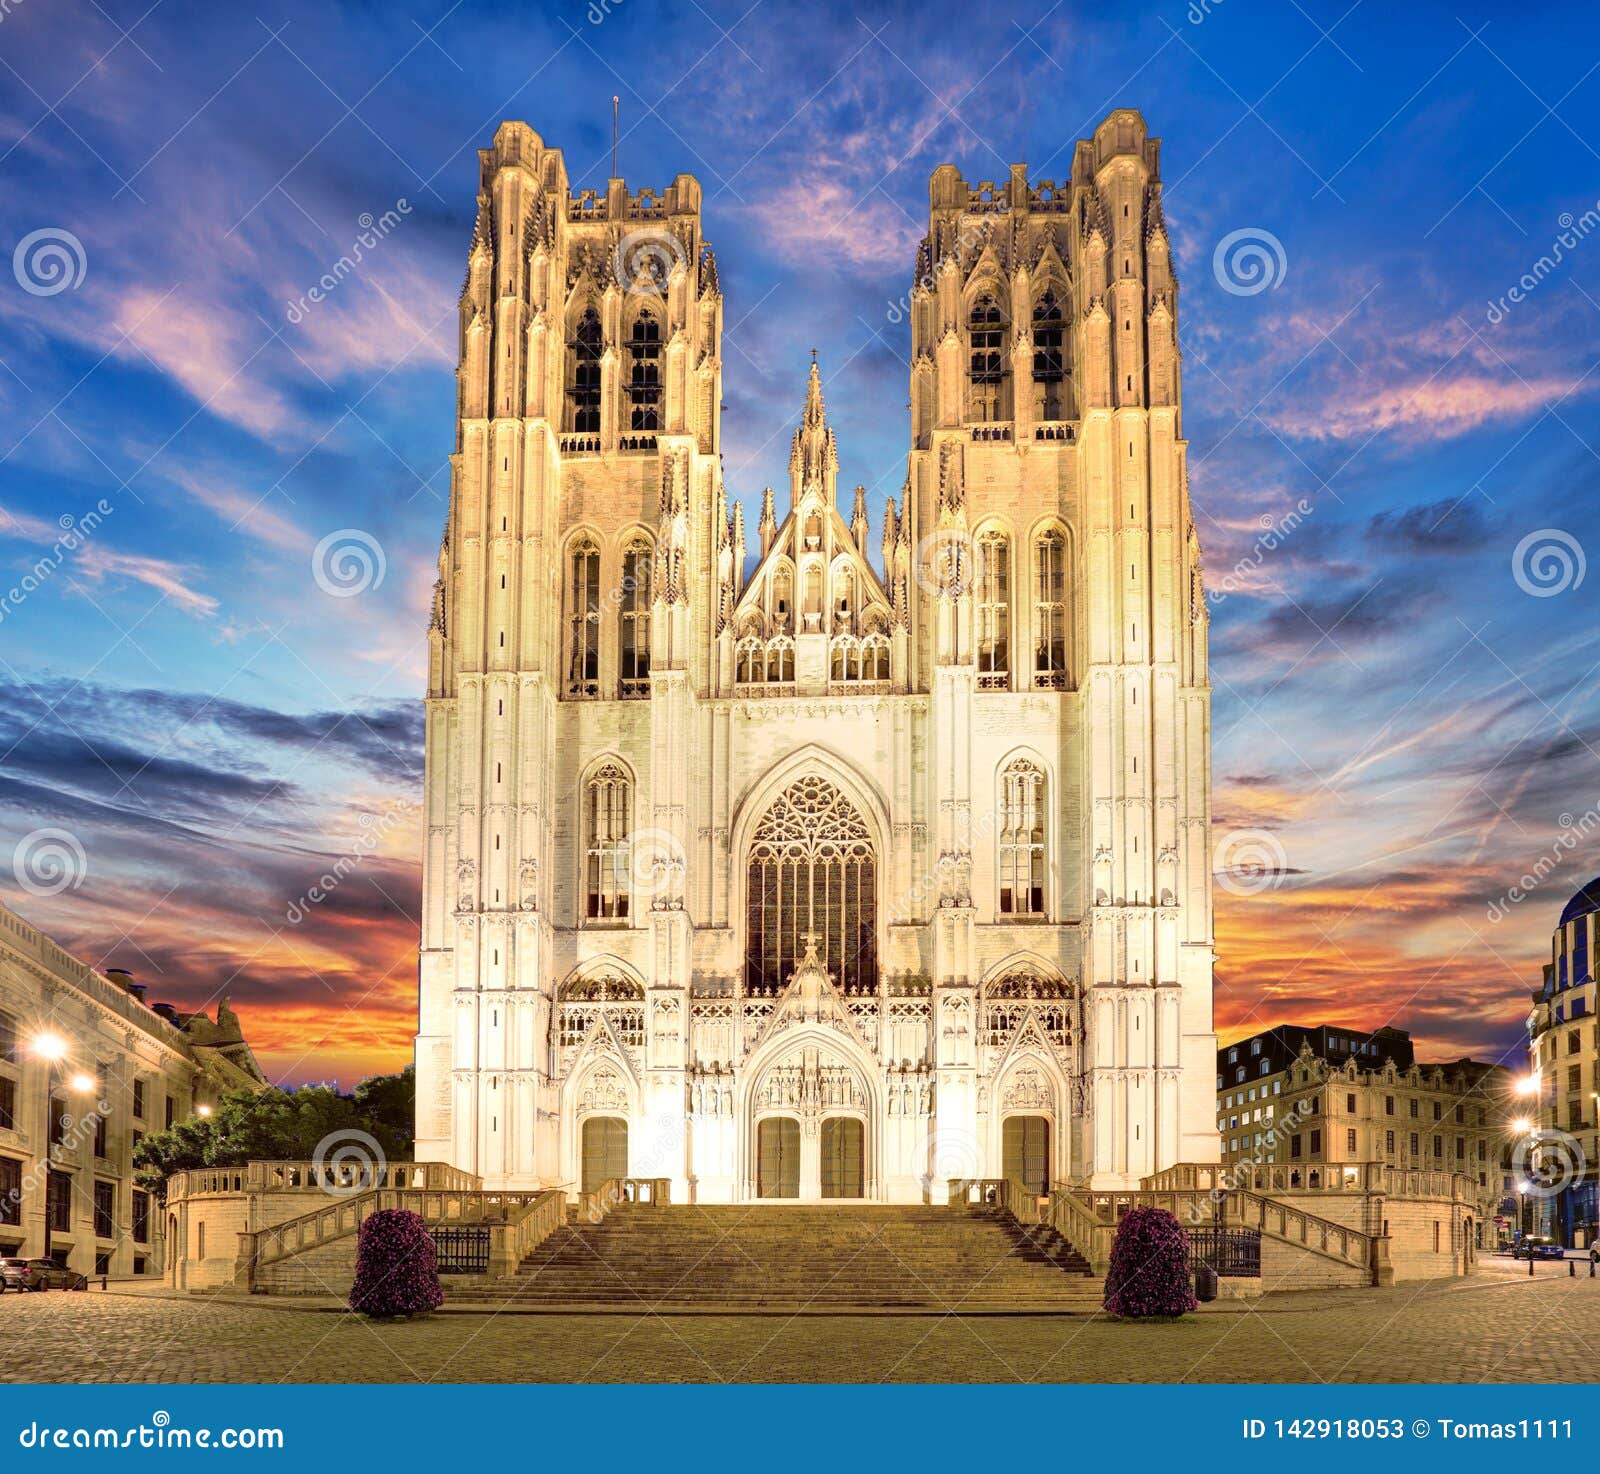 brussels - cathedral of st. michael and st. gudula, belgium